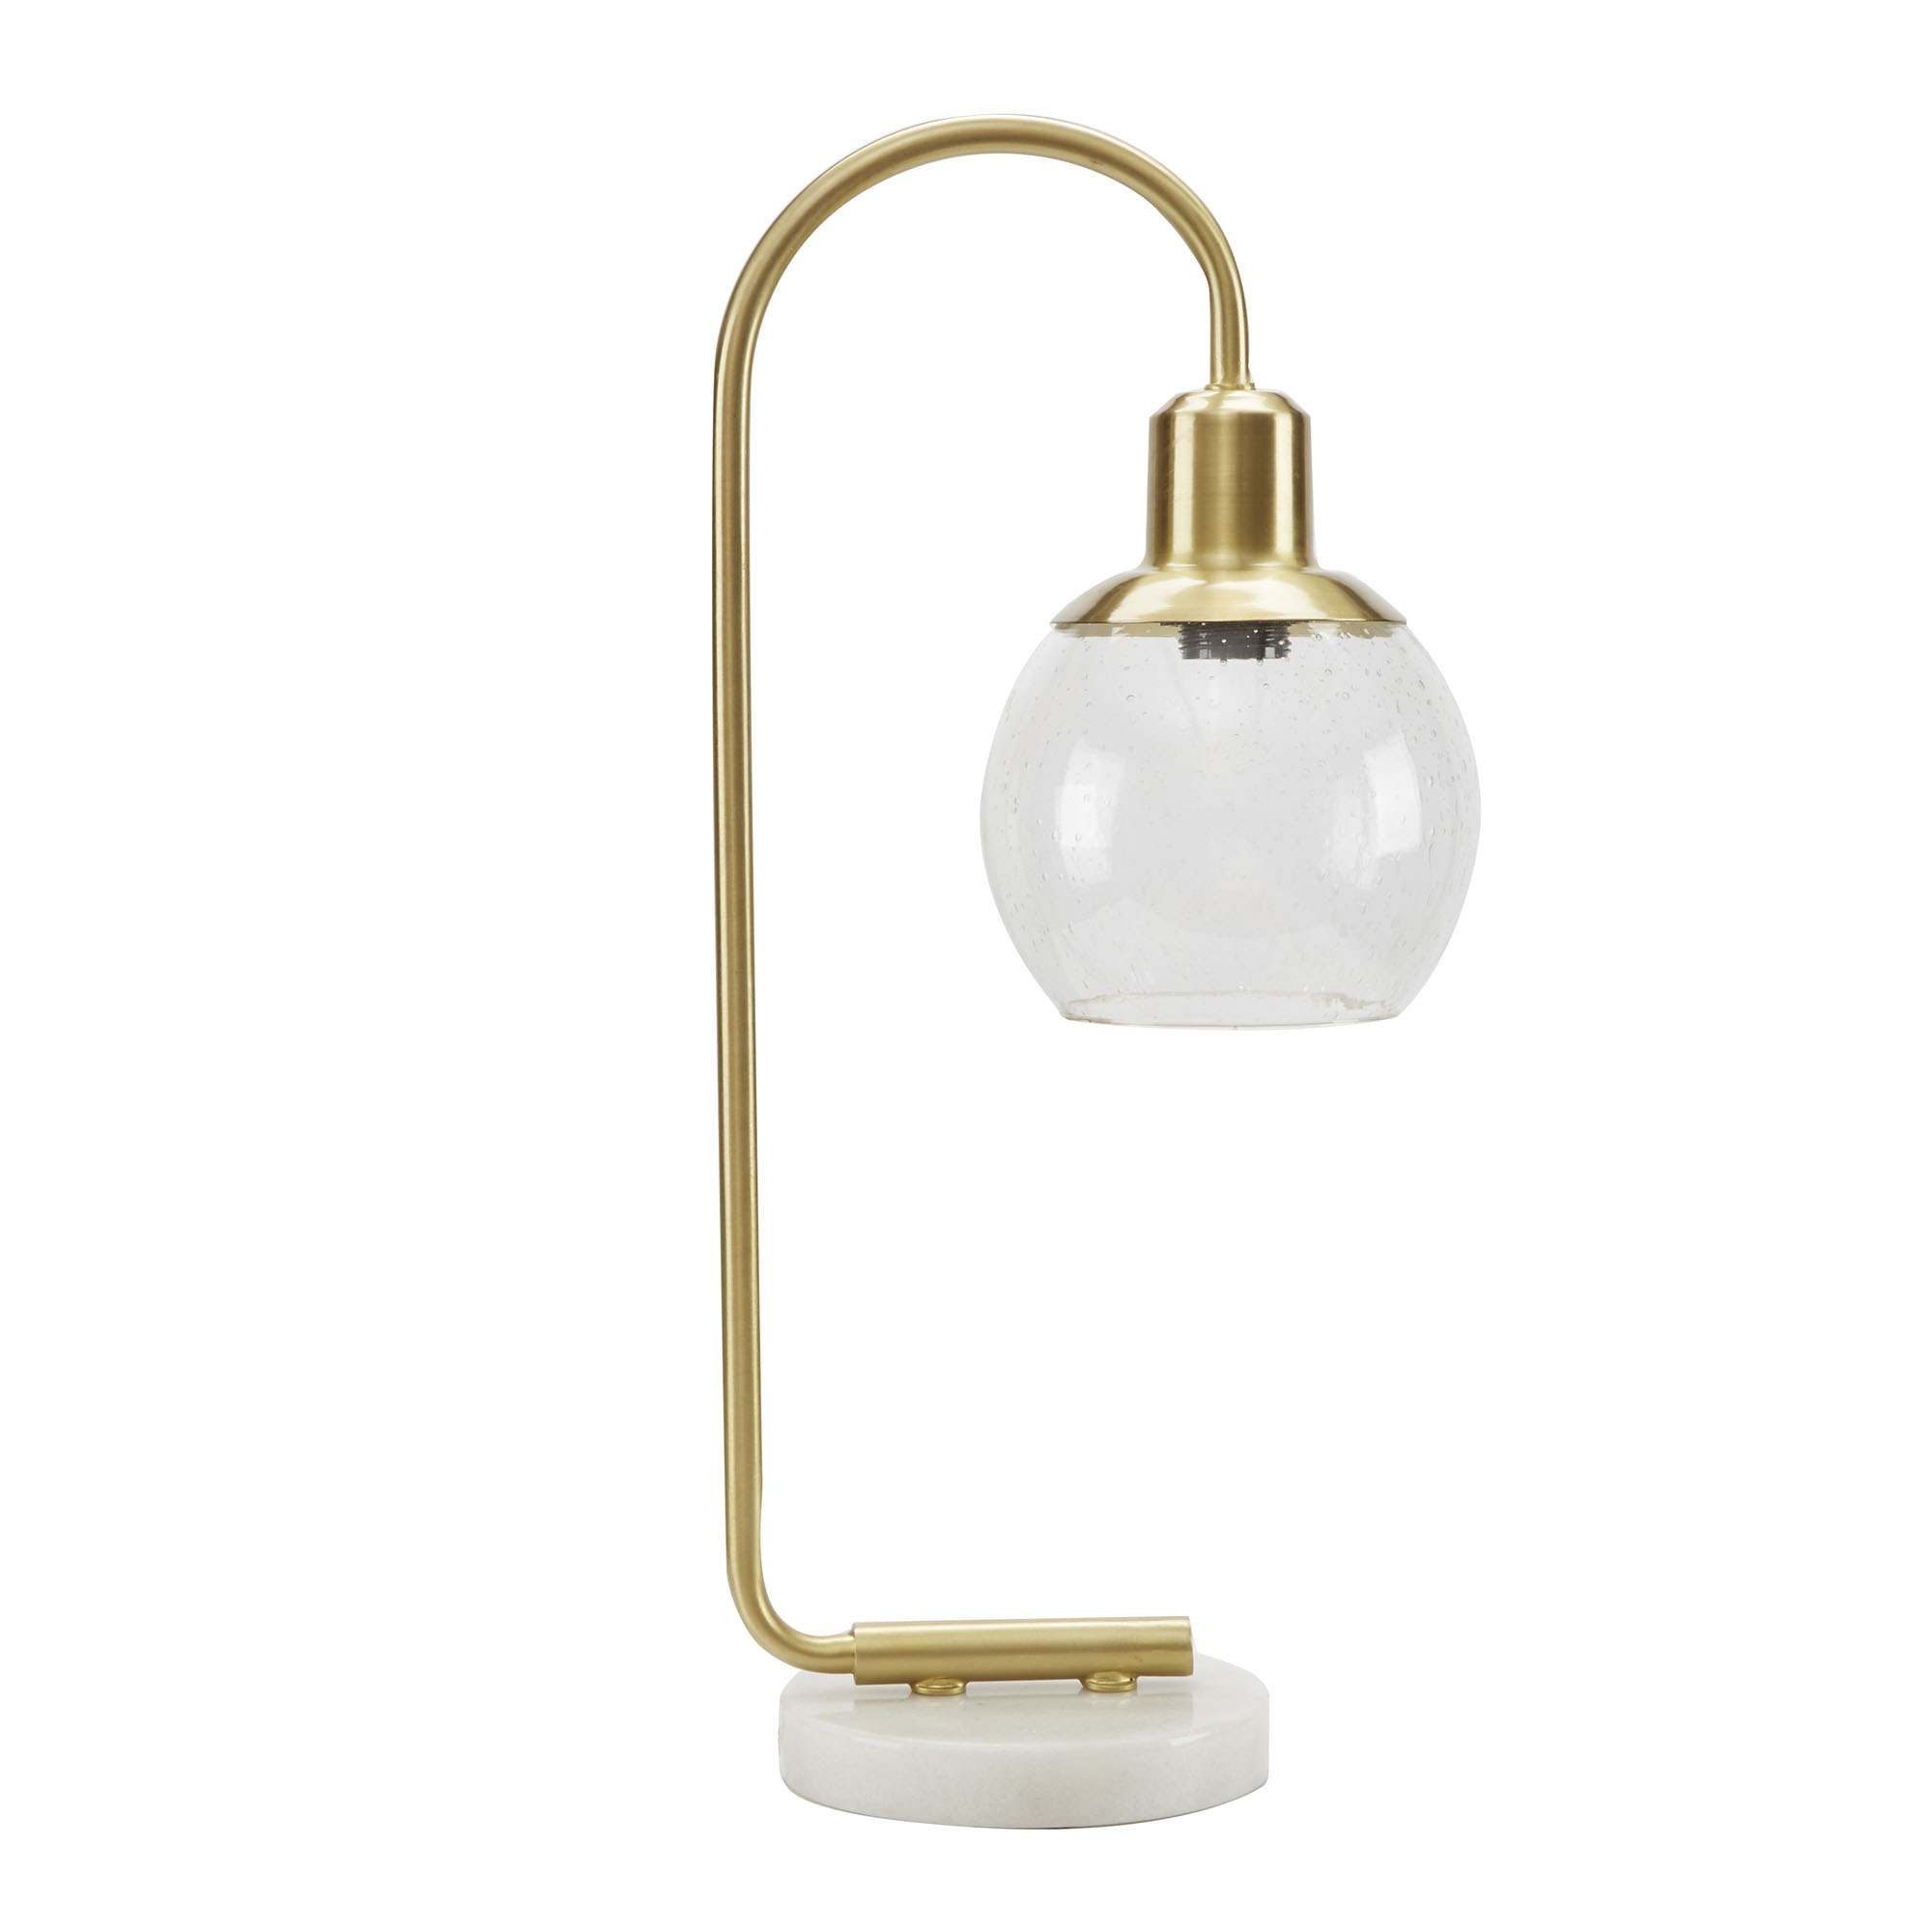 Better Homes & Gardens Real Marble Table Lamp, Brushed Brass Finish - image 1 of 5